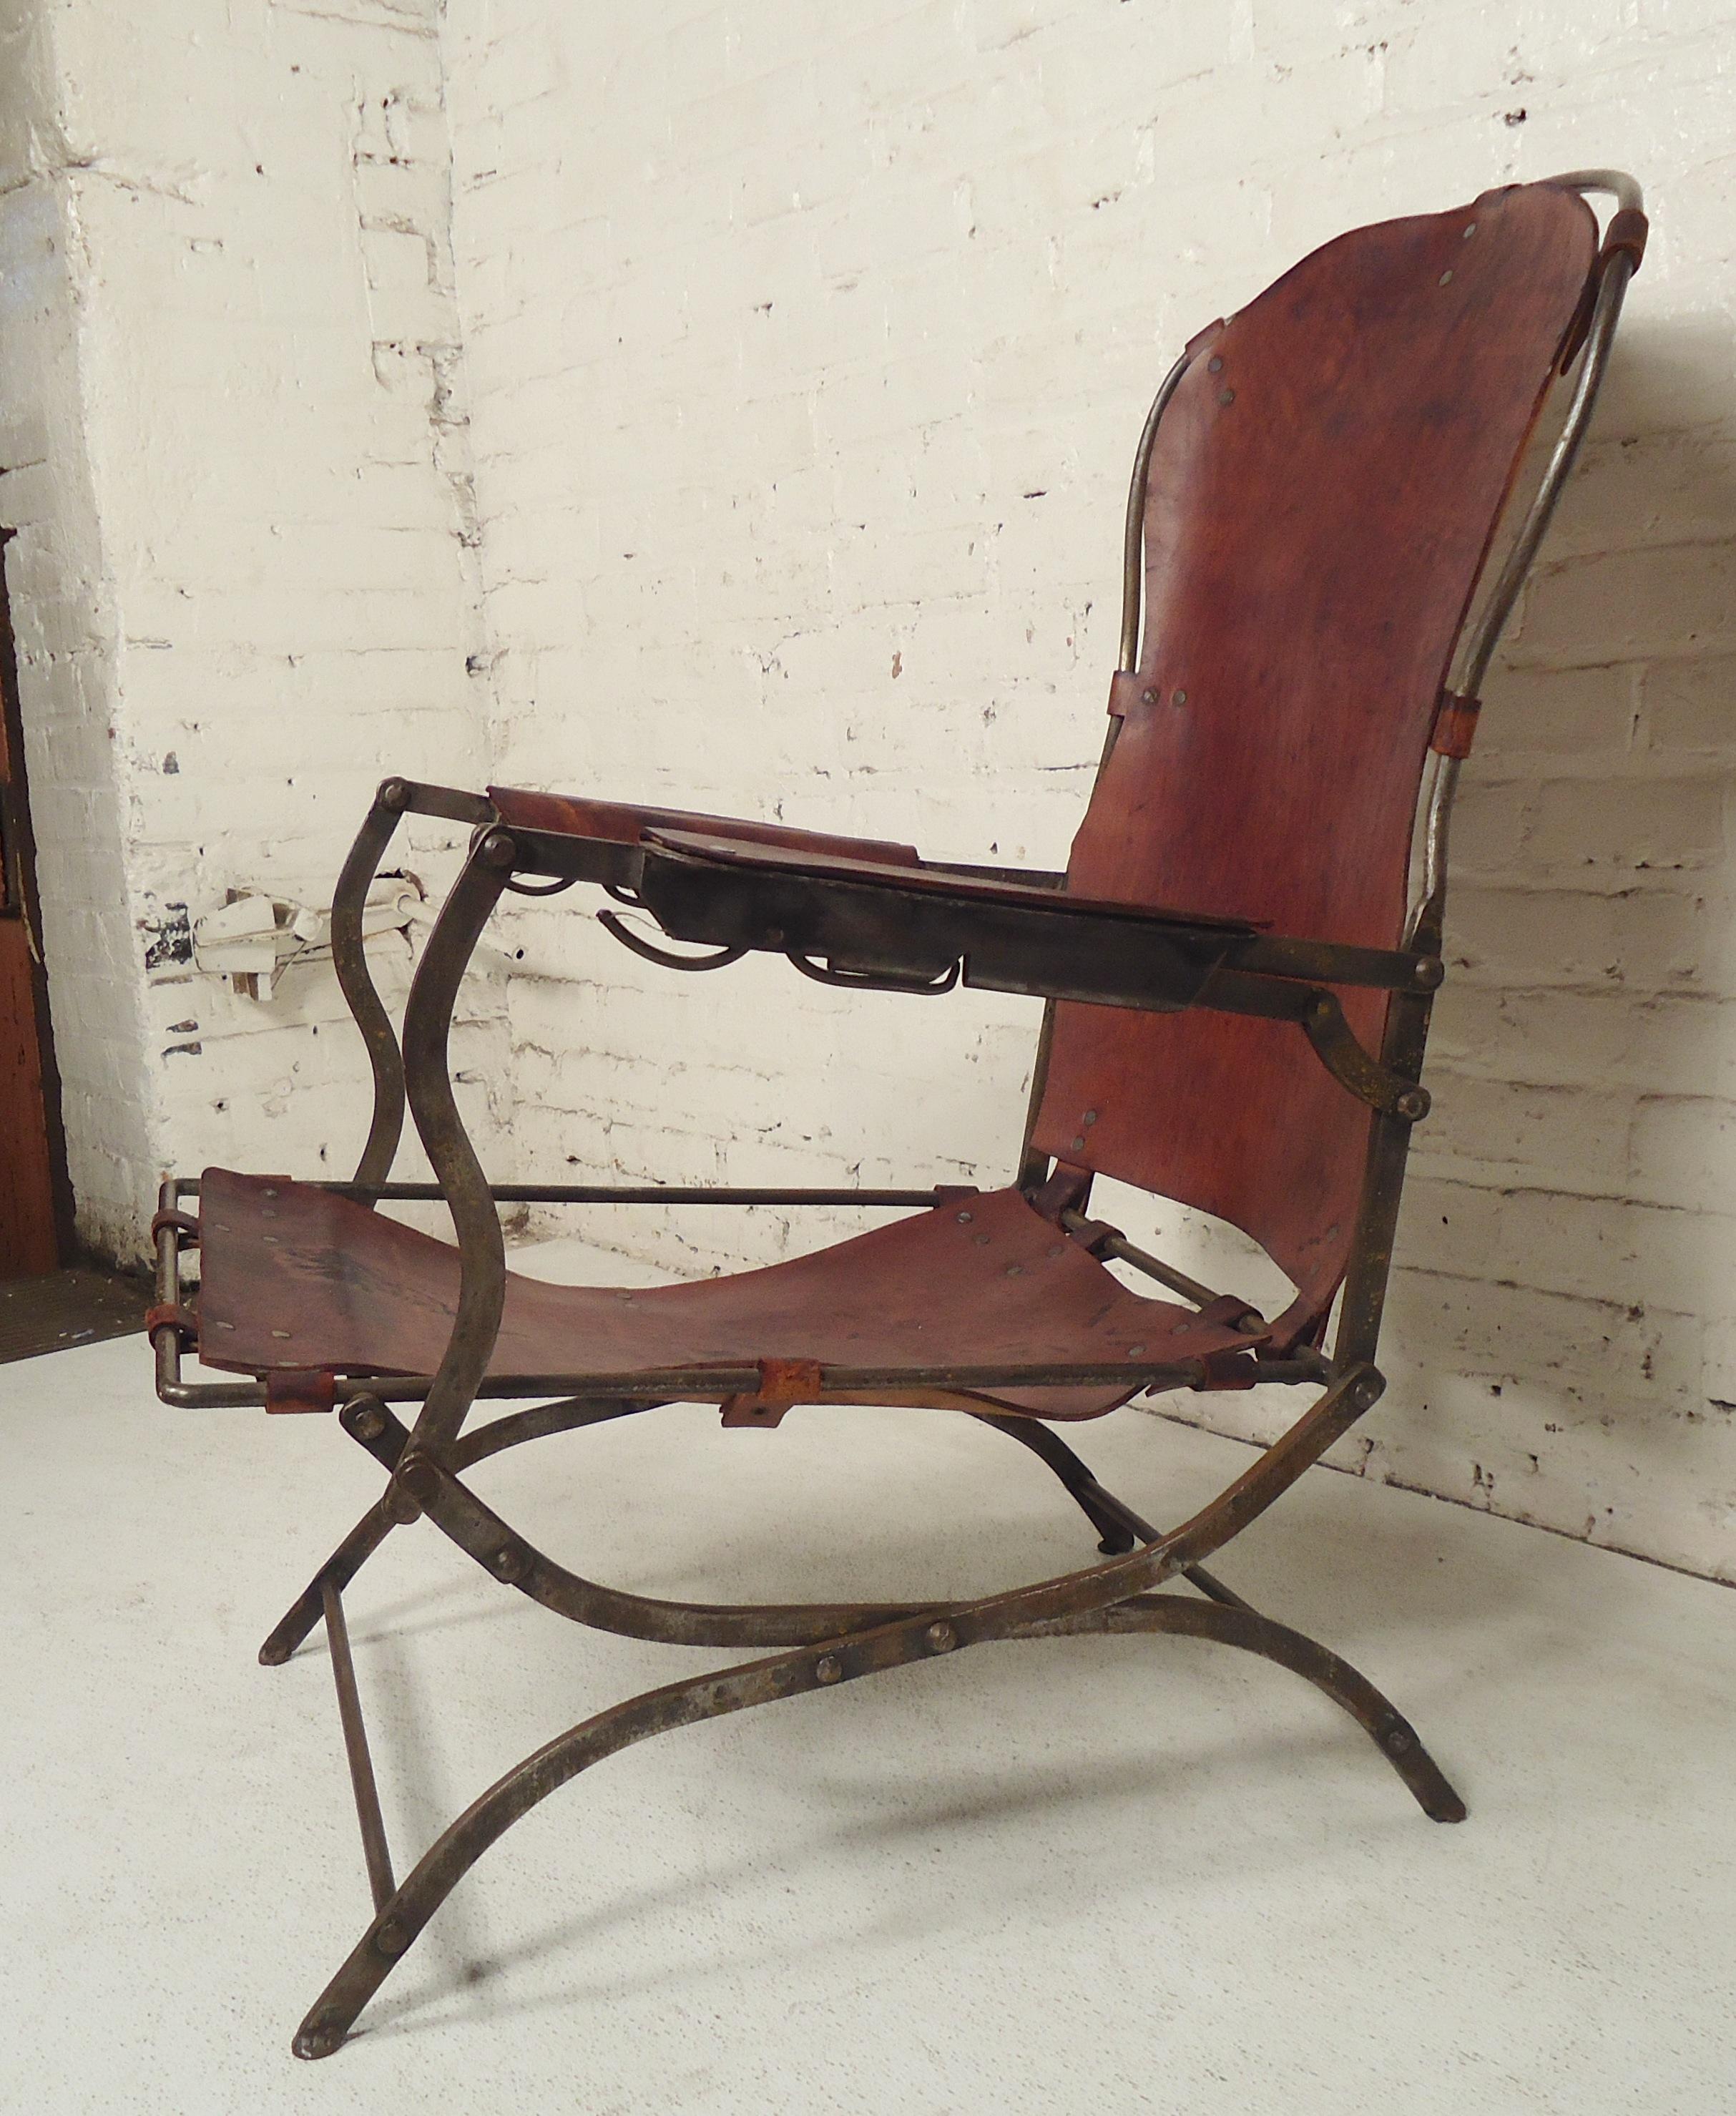 Very unusual armchair with industrial style metal frame and leather seating with beautiful patina.

(Please confirm item location - NY or NJ - with dealer).
 